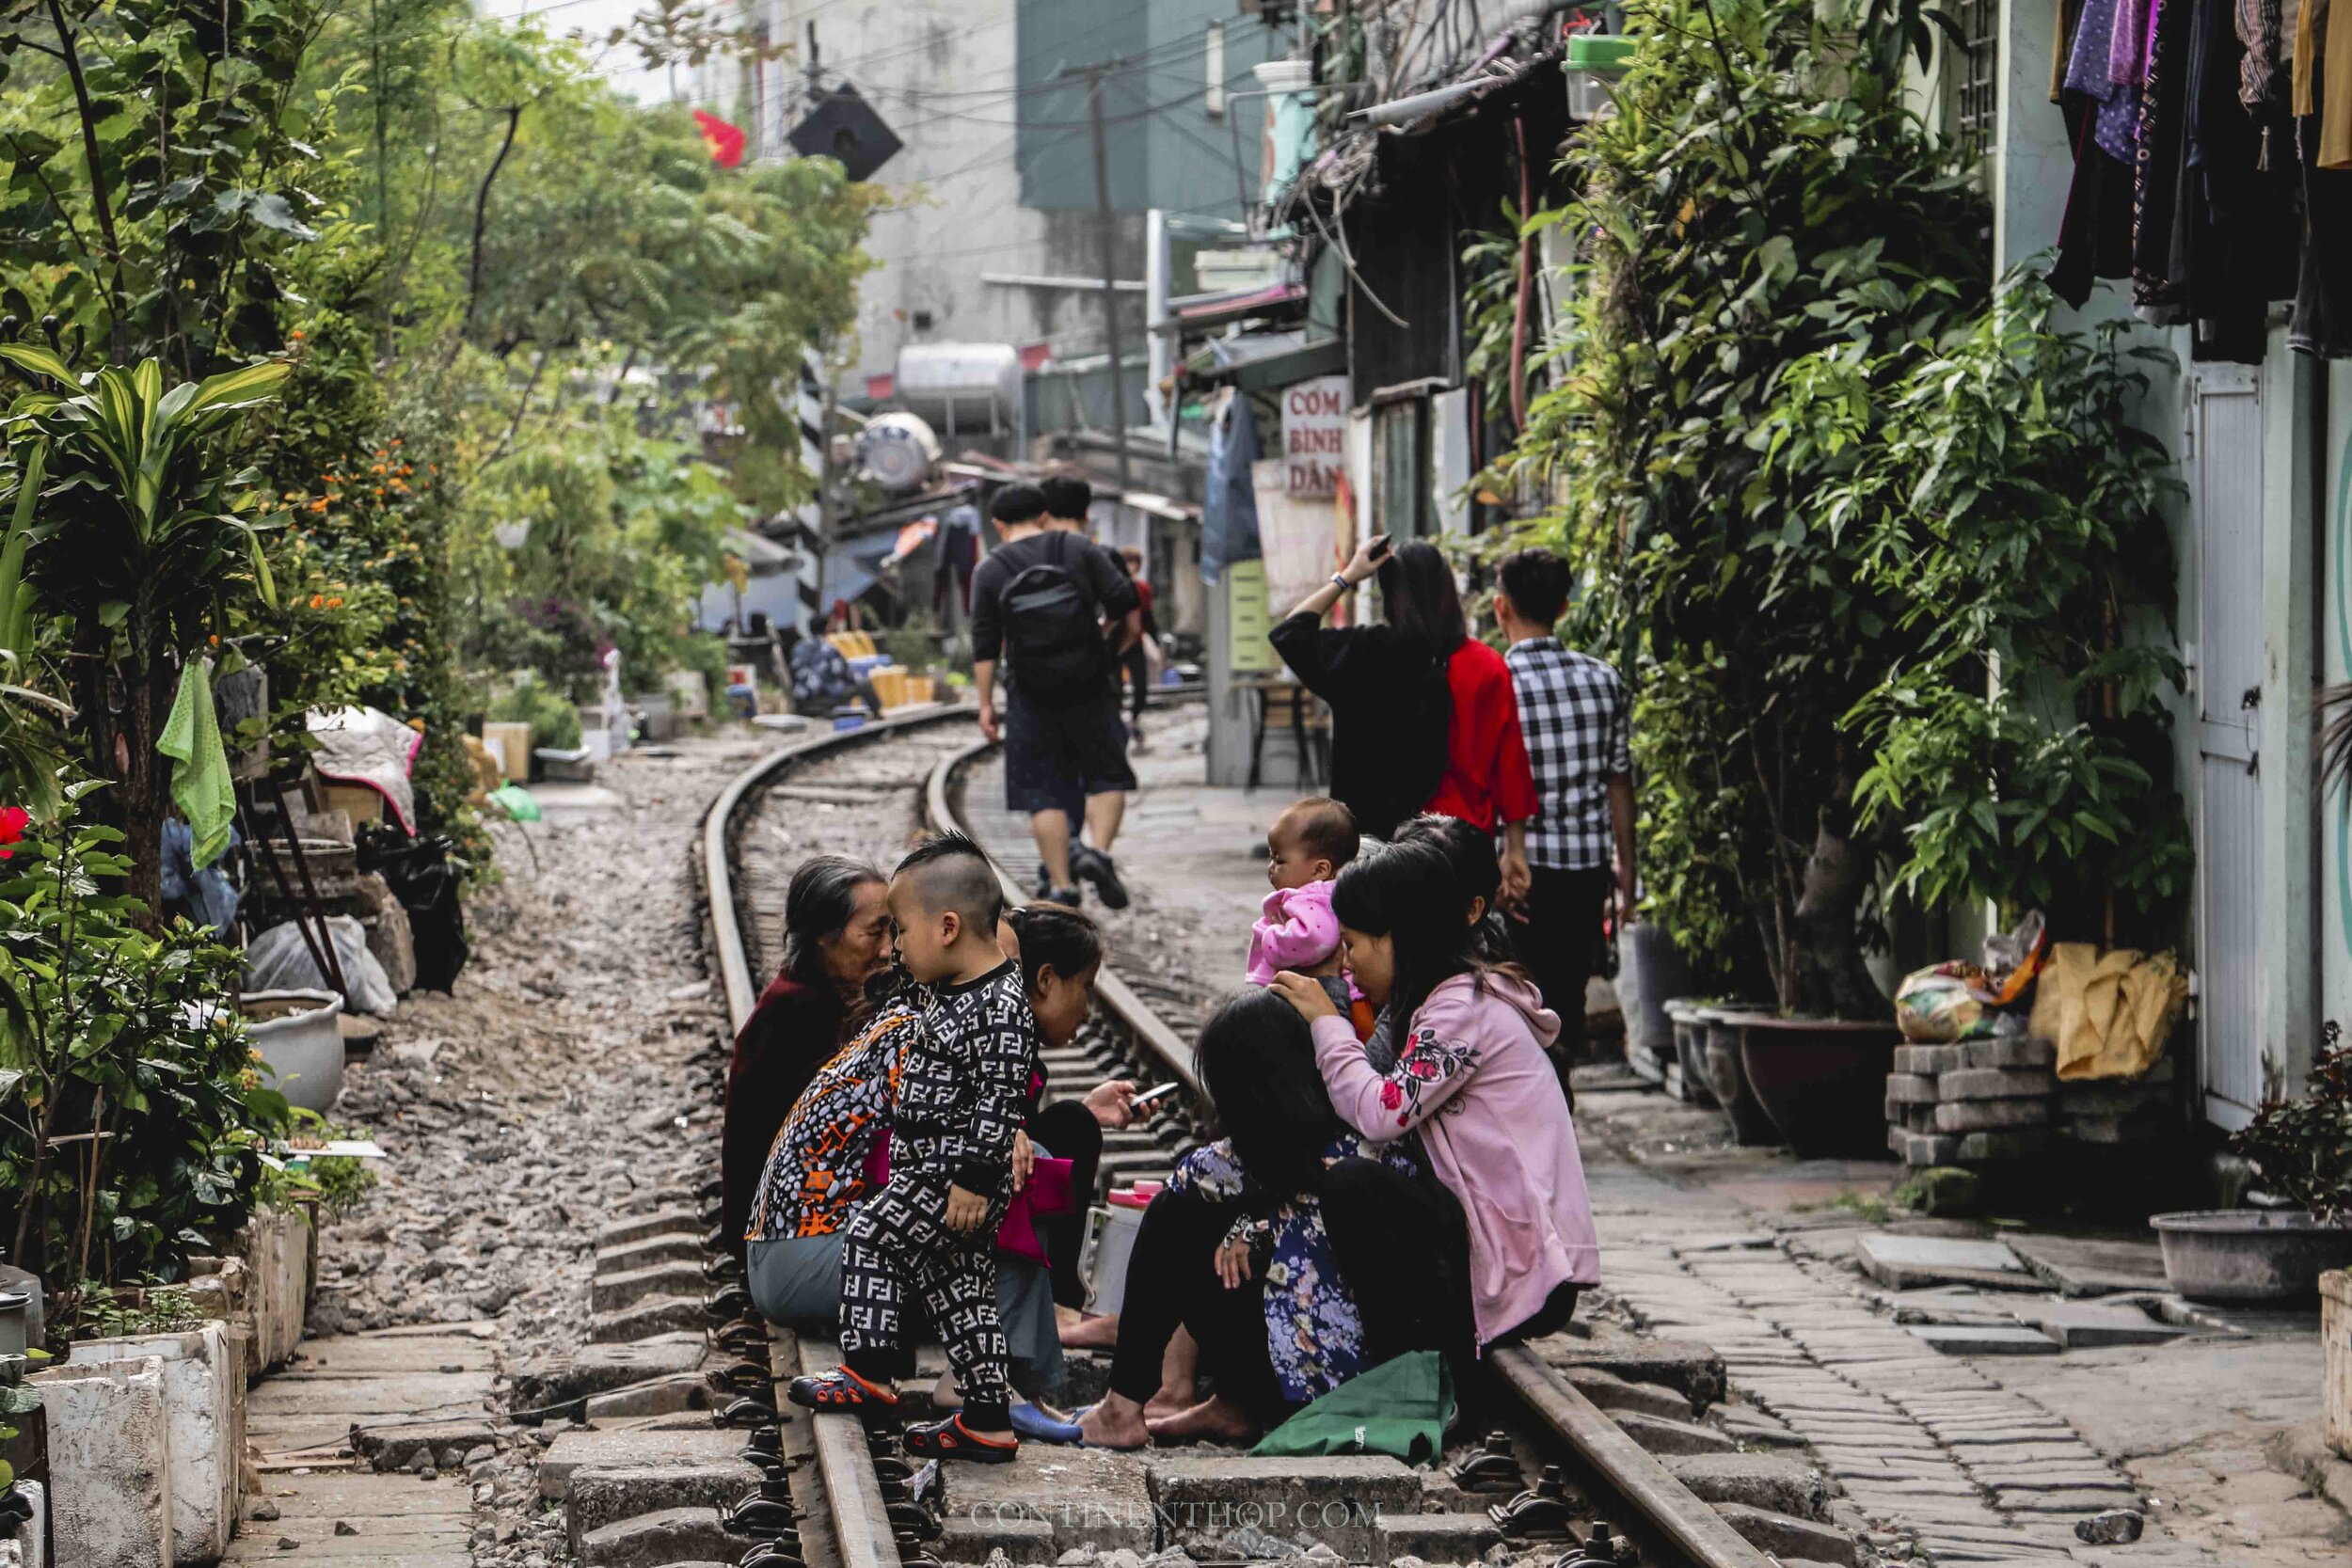 Image of people in Hanoi Vietnam sitting on a train track chatting